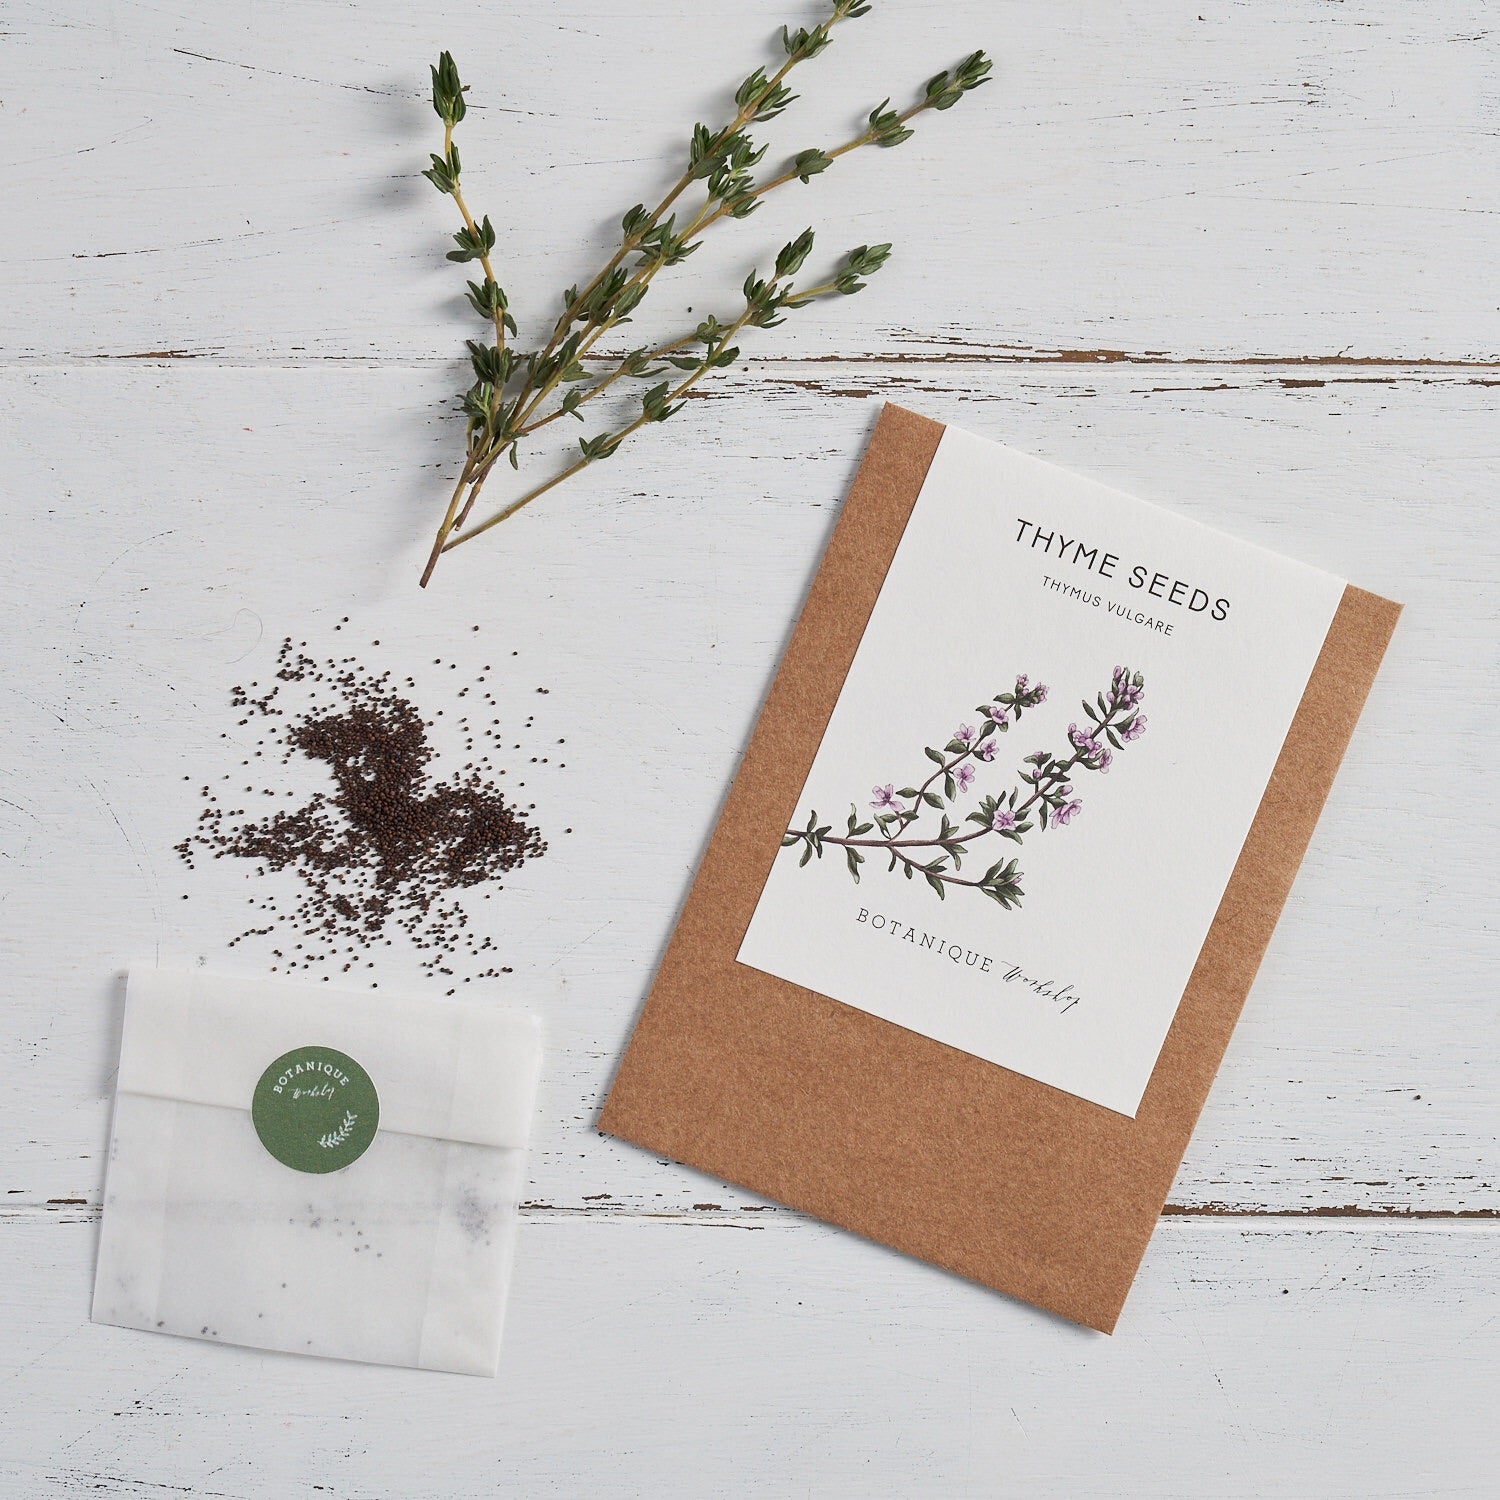 Kitchen Garden Seed Set - Chilli, Mint, Basil and Thyme.